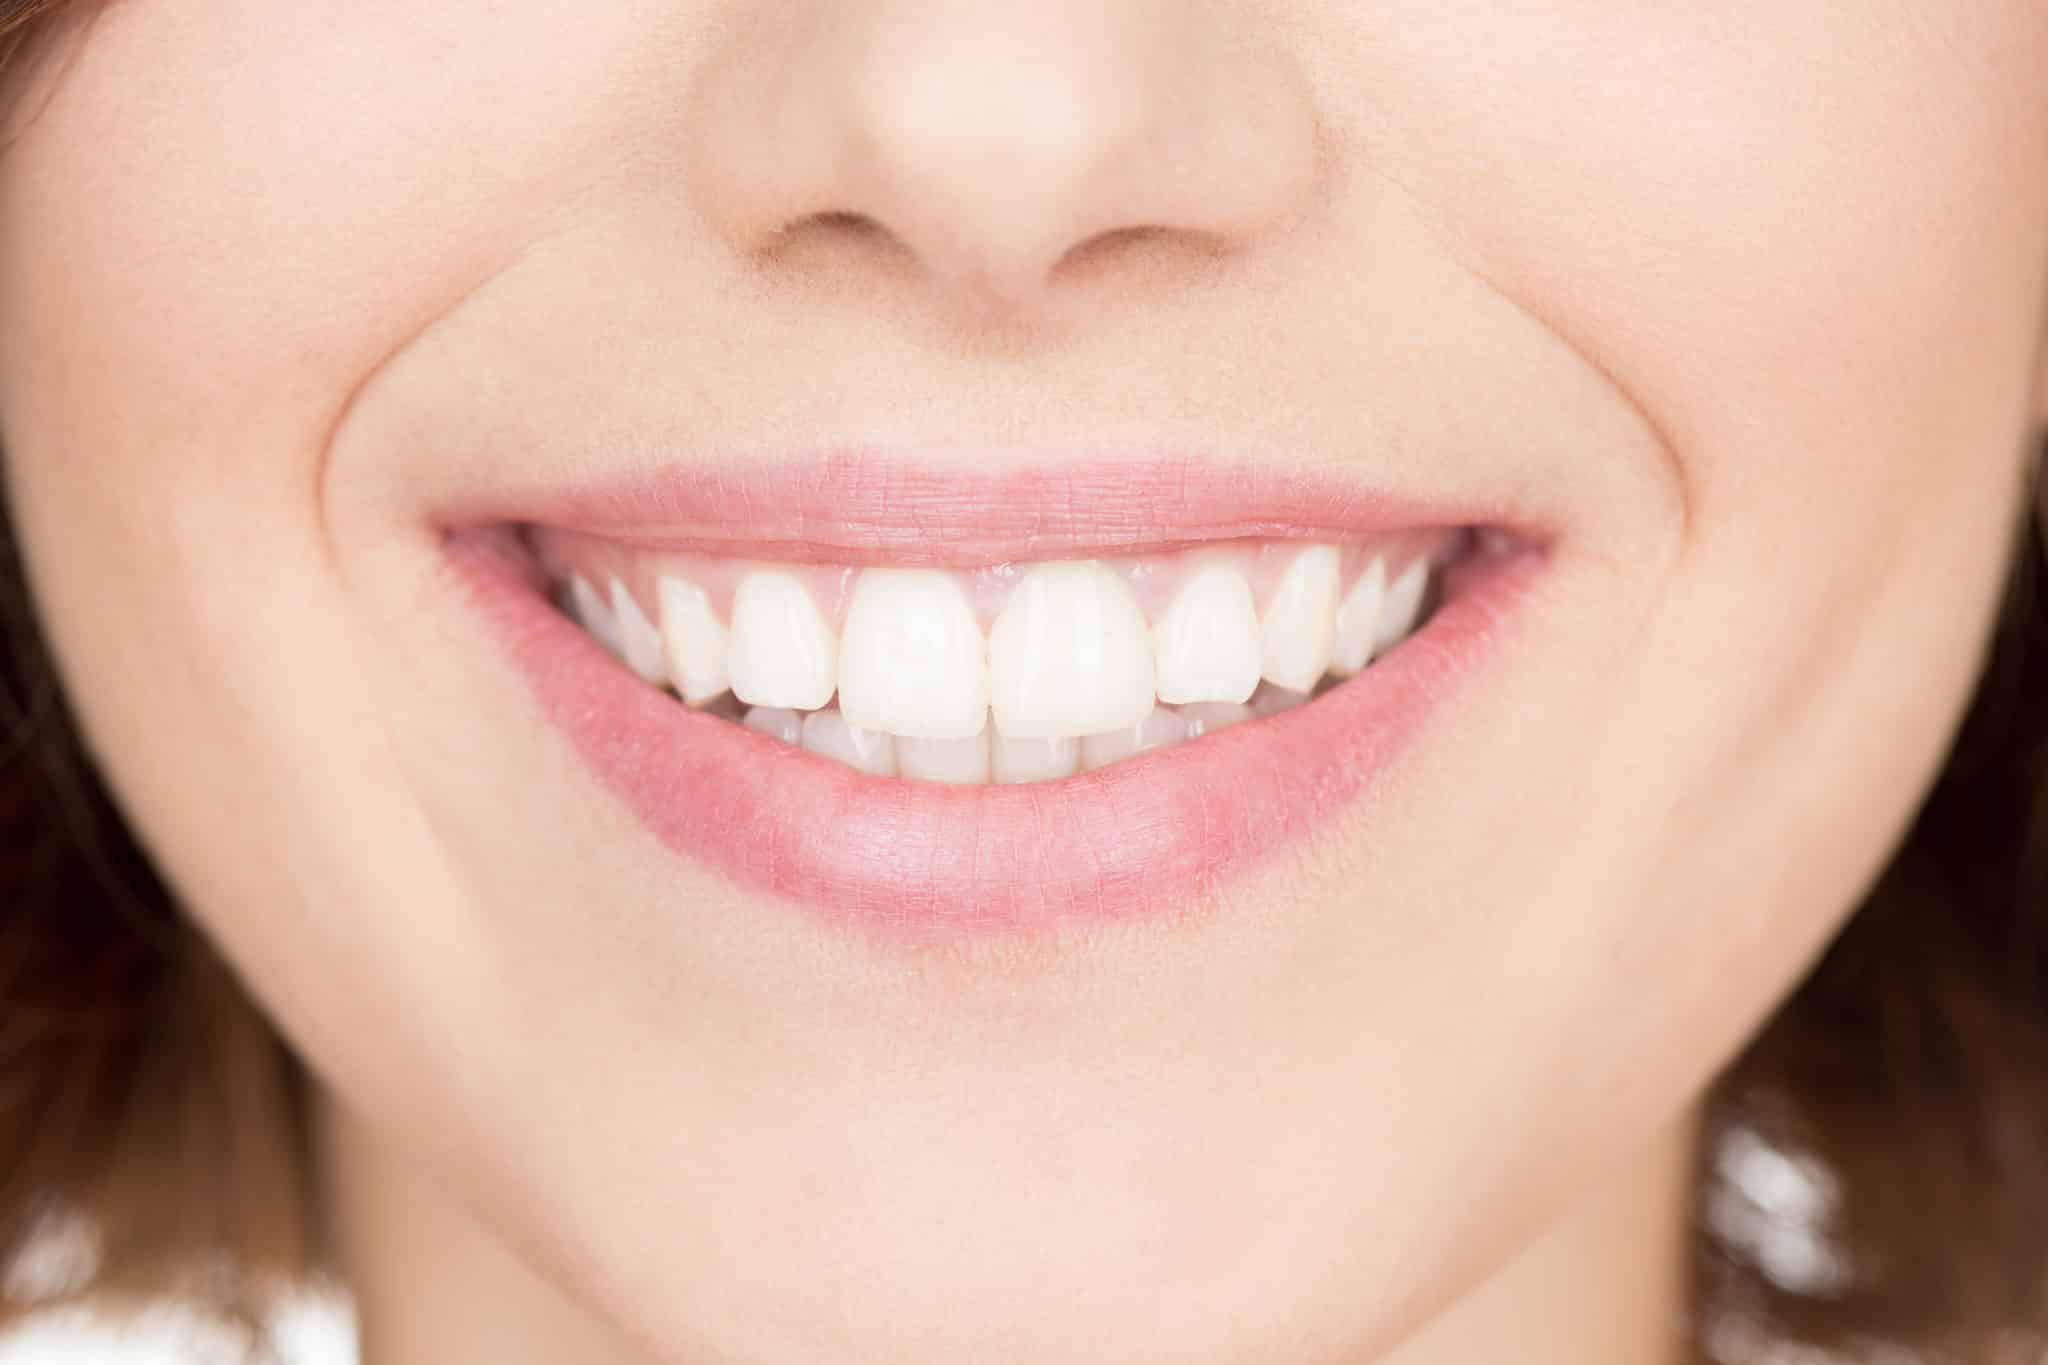 Close-up of woman's smile showing her white teeth